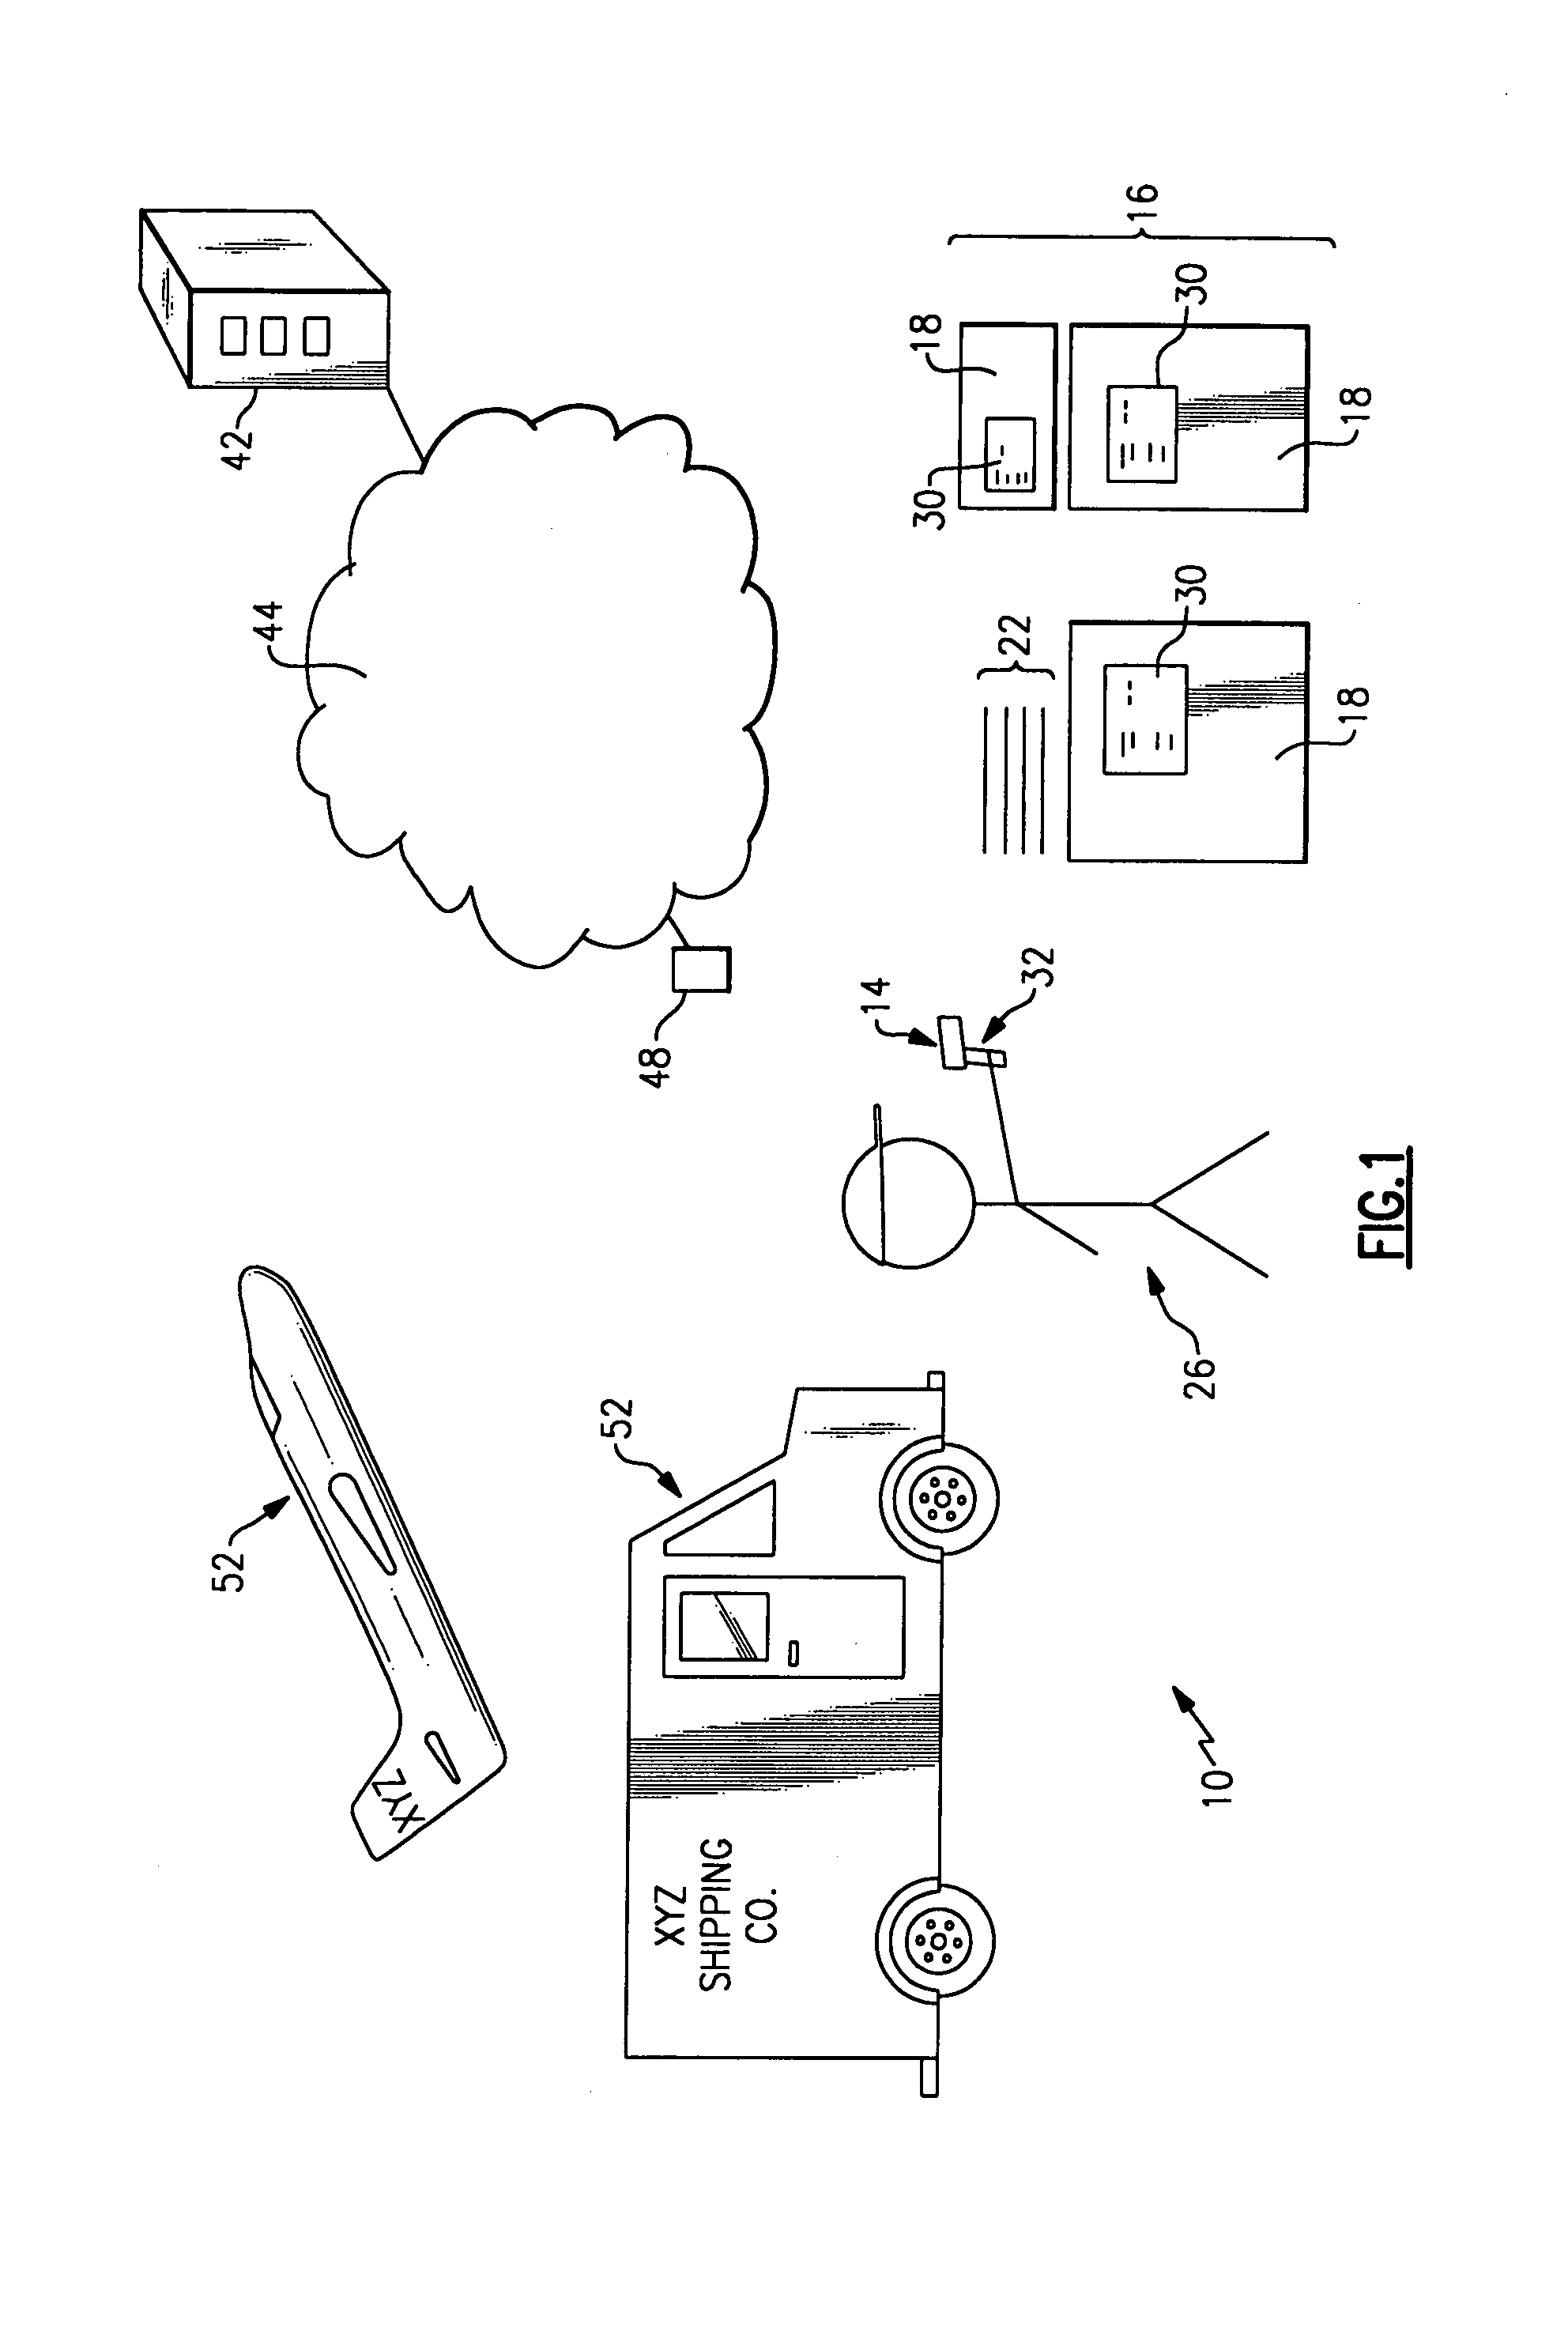 System and method to automatically discriminate between a signature and a dataform